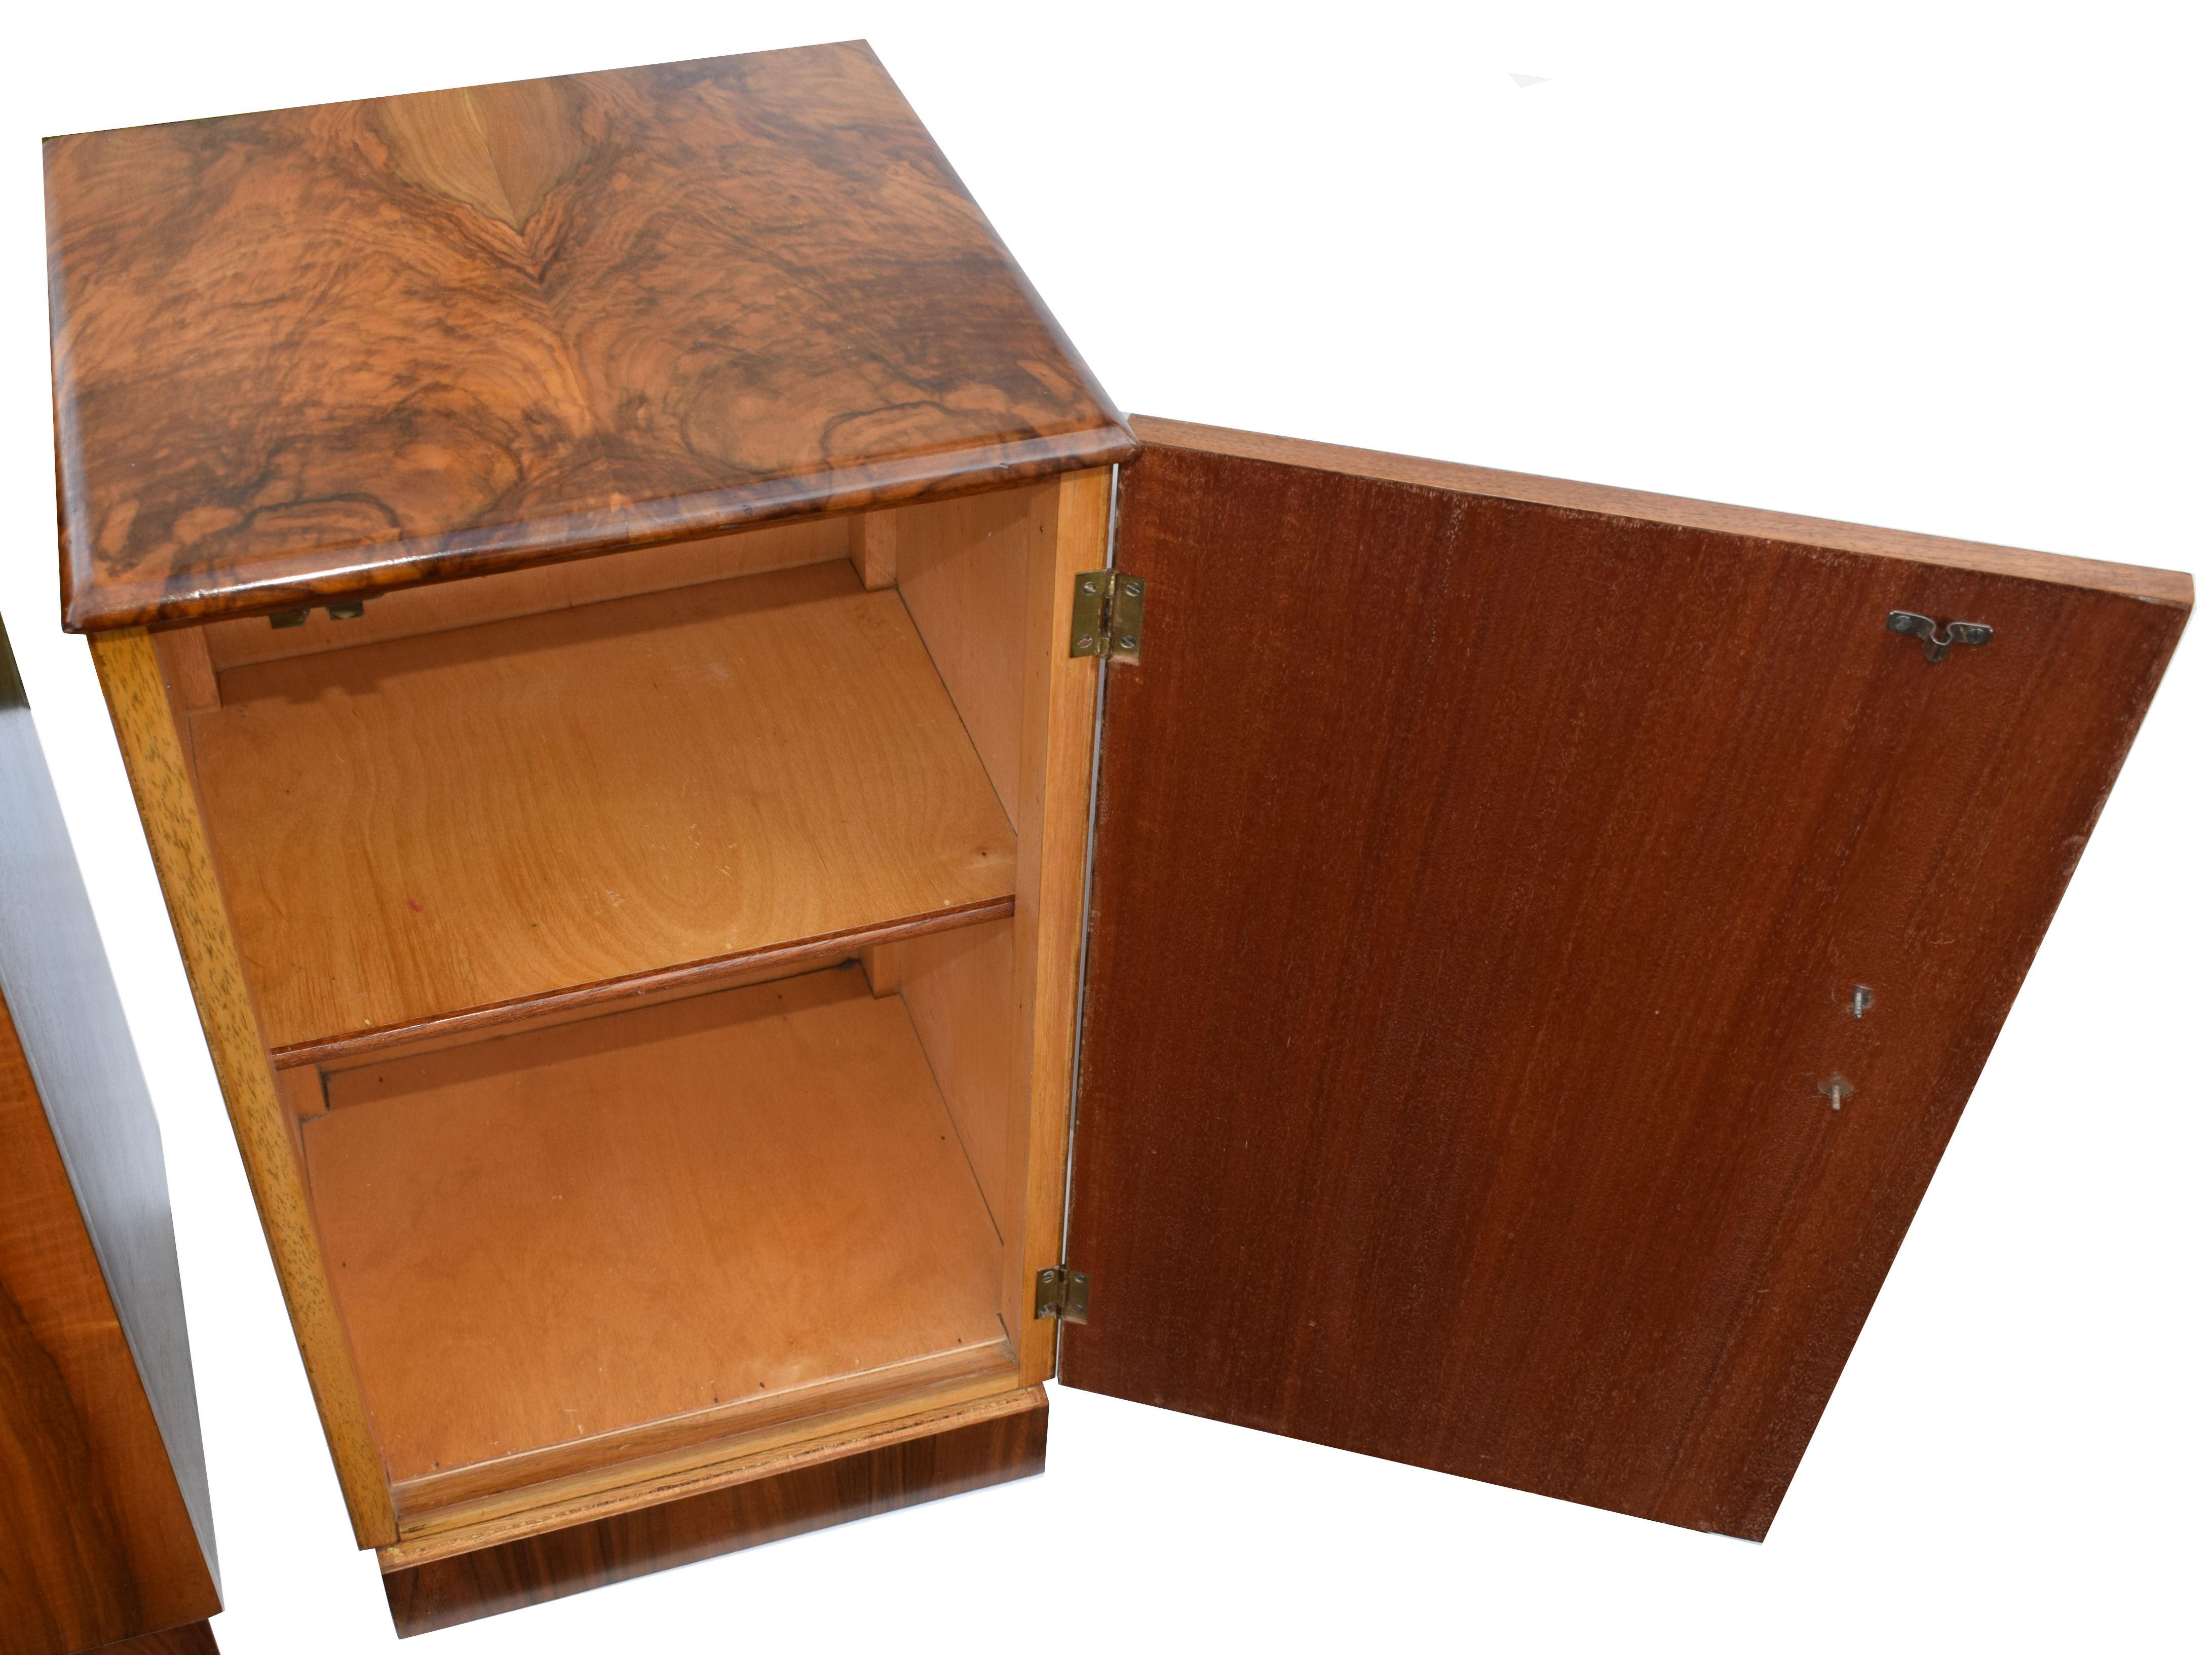 English Matching Pair of Art Deco Walnut Bedside Table Cabinets